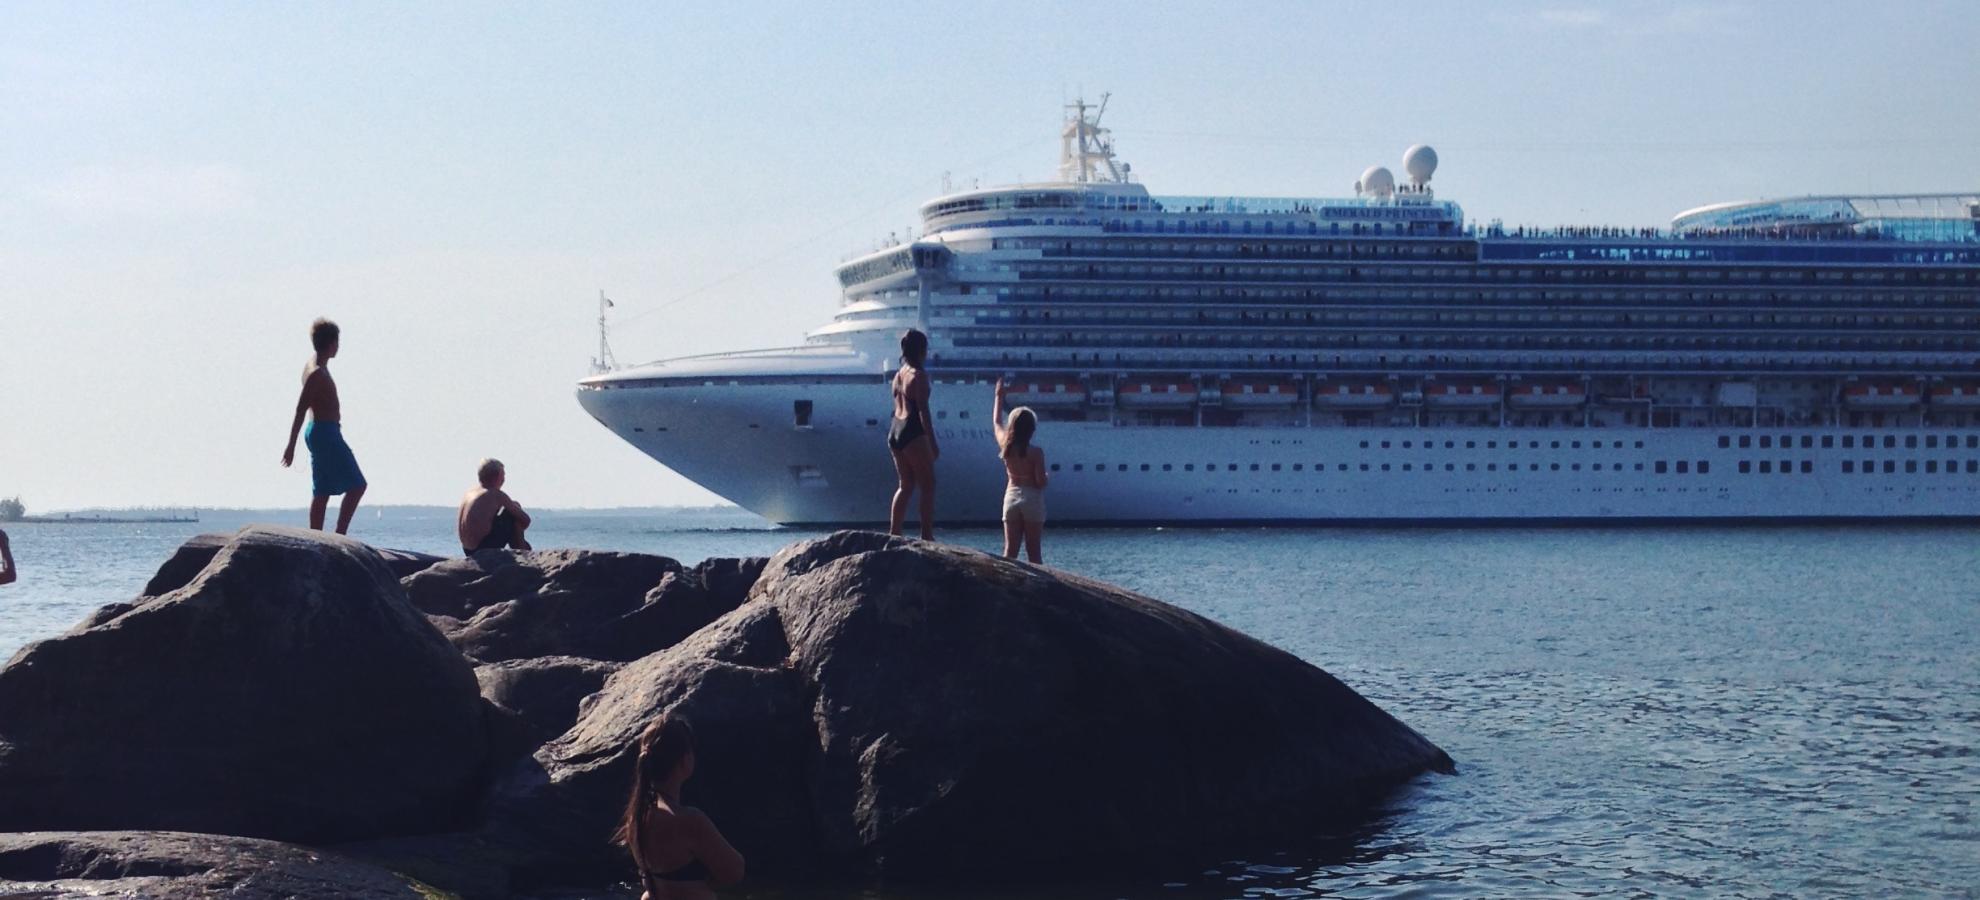 As a cruise ship passes by in the distance, a small group of sunbathers and swimmers stand in the water and on nearby rocks, watching and waving at the ship.